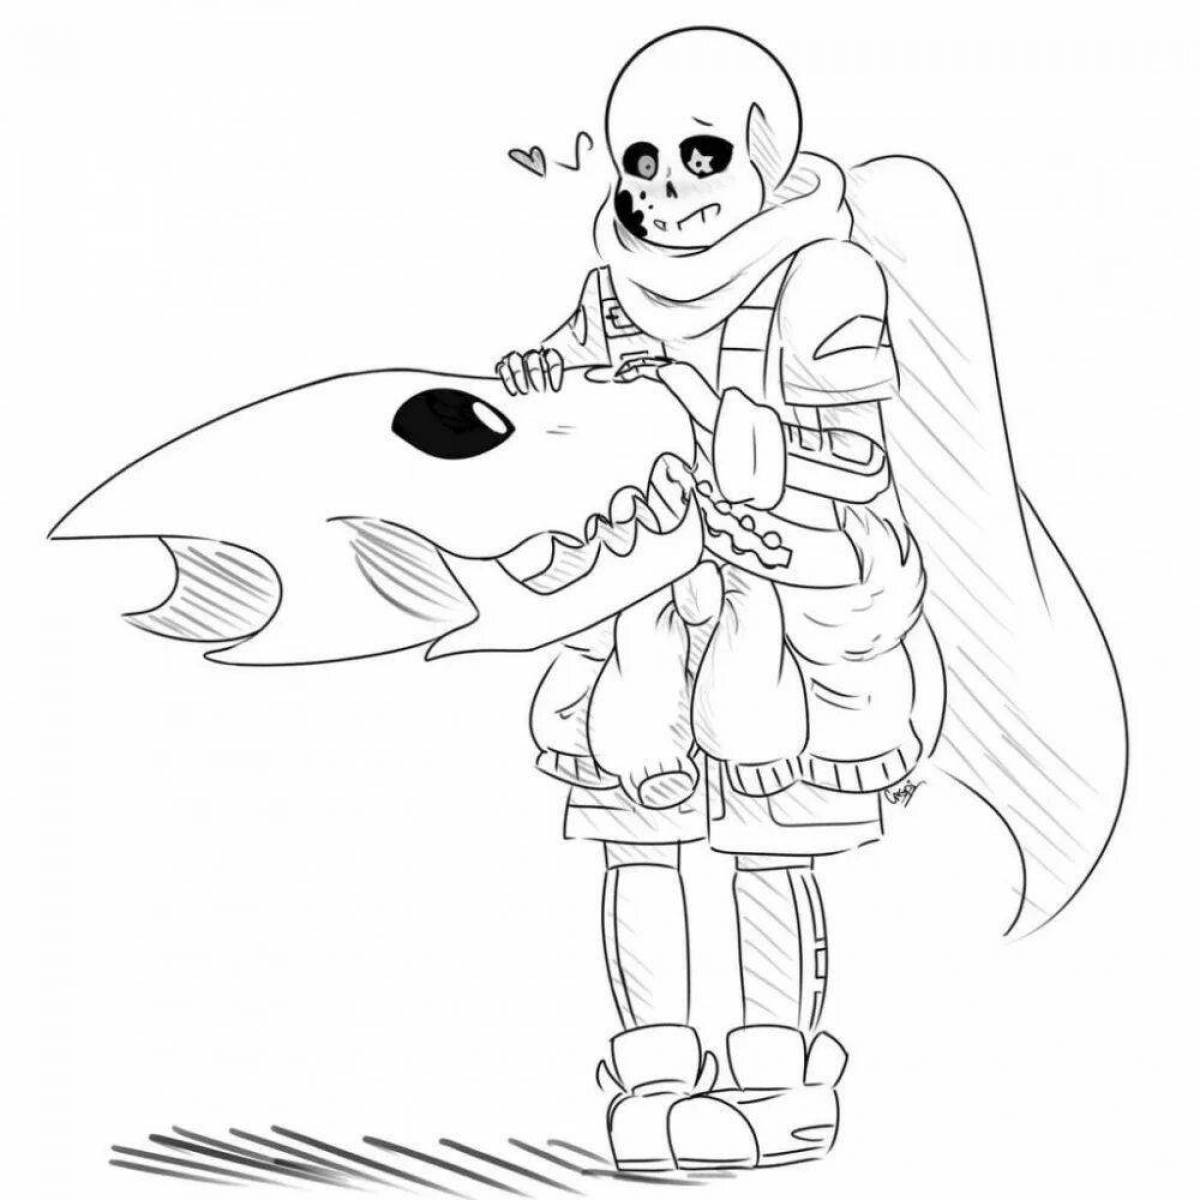 Cute ink sans coloring page